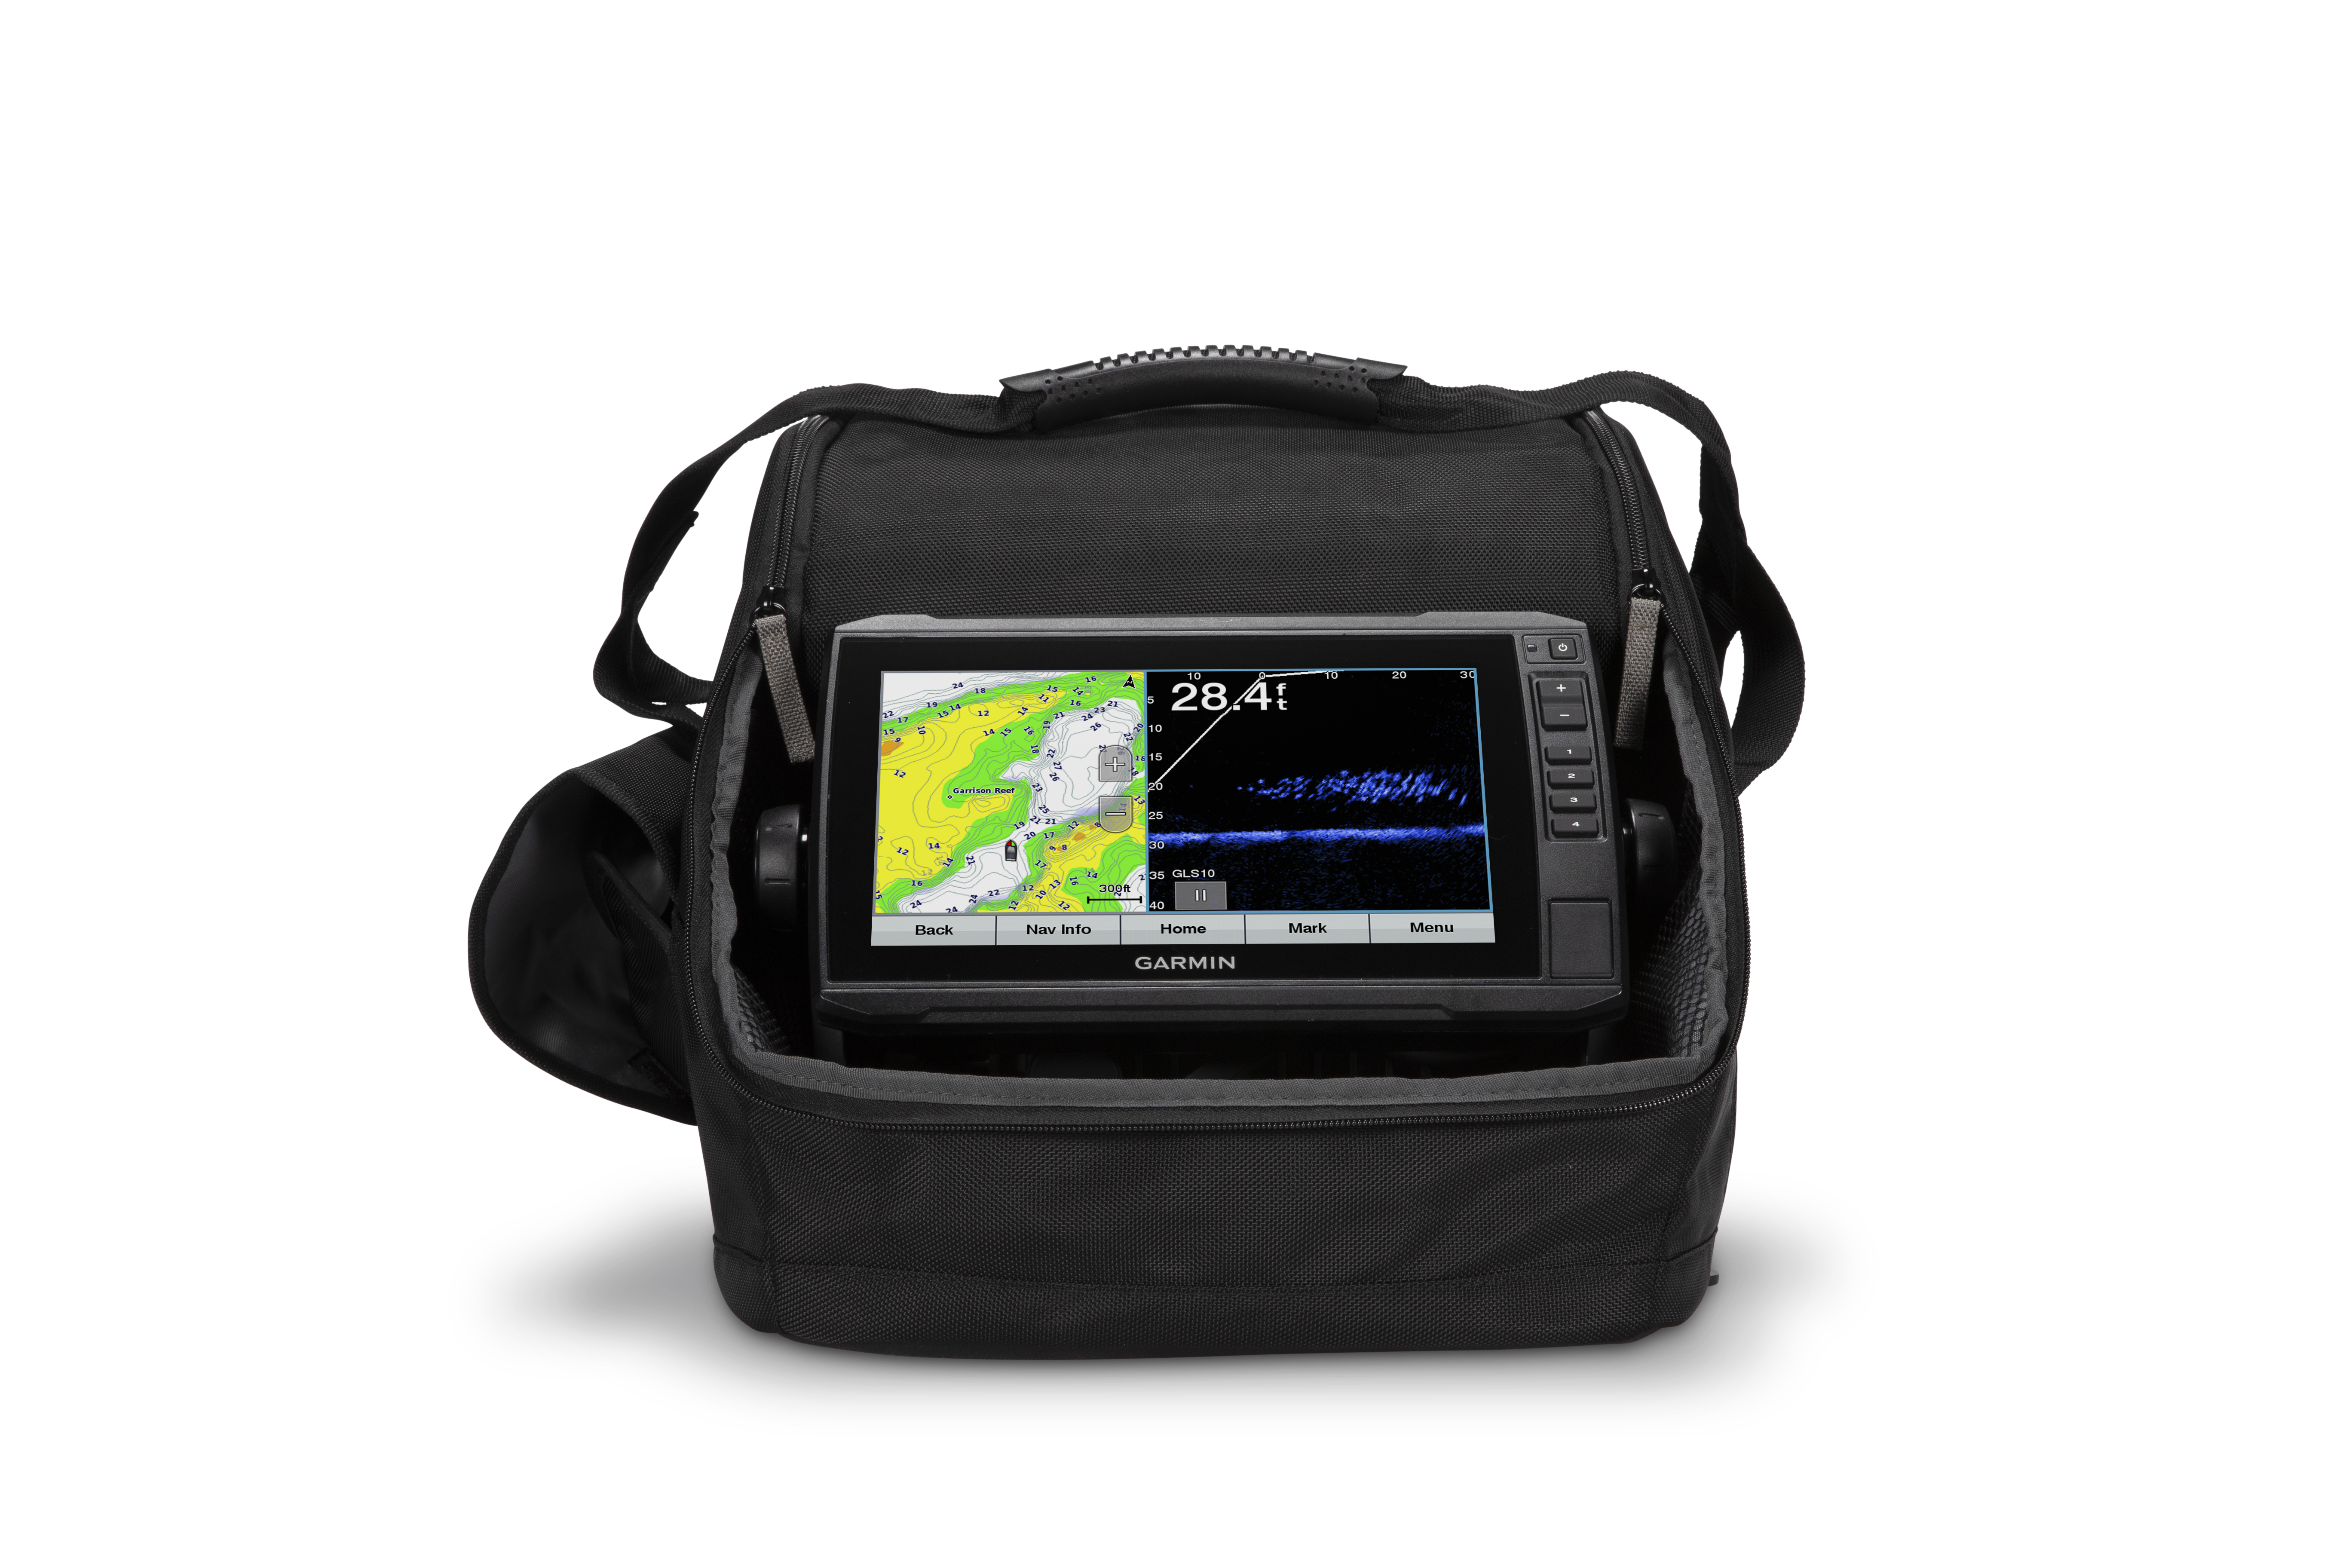 Garmin® introduces the Panoptix LiveScope Ice Fishing Bundle, a hard water  solution with revolutionary sonar capabilities